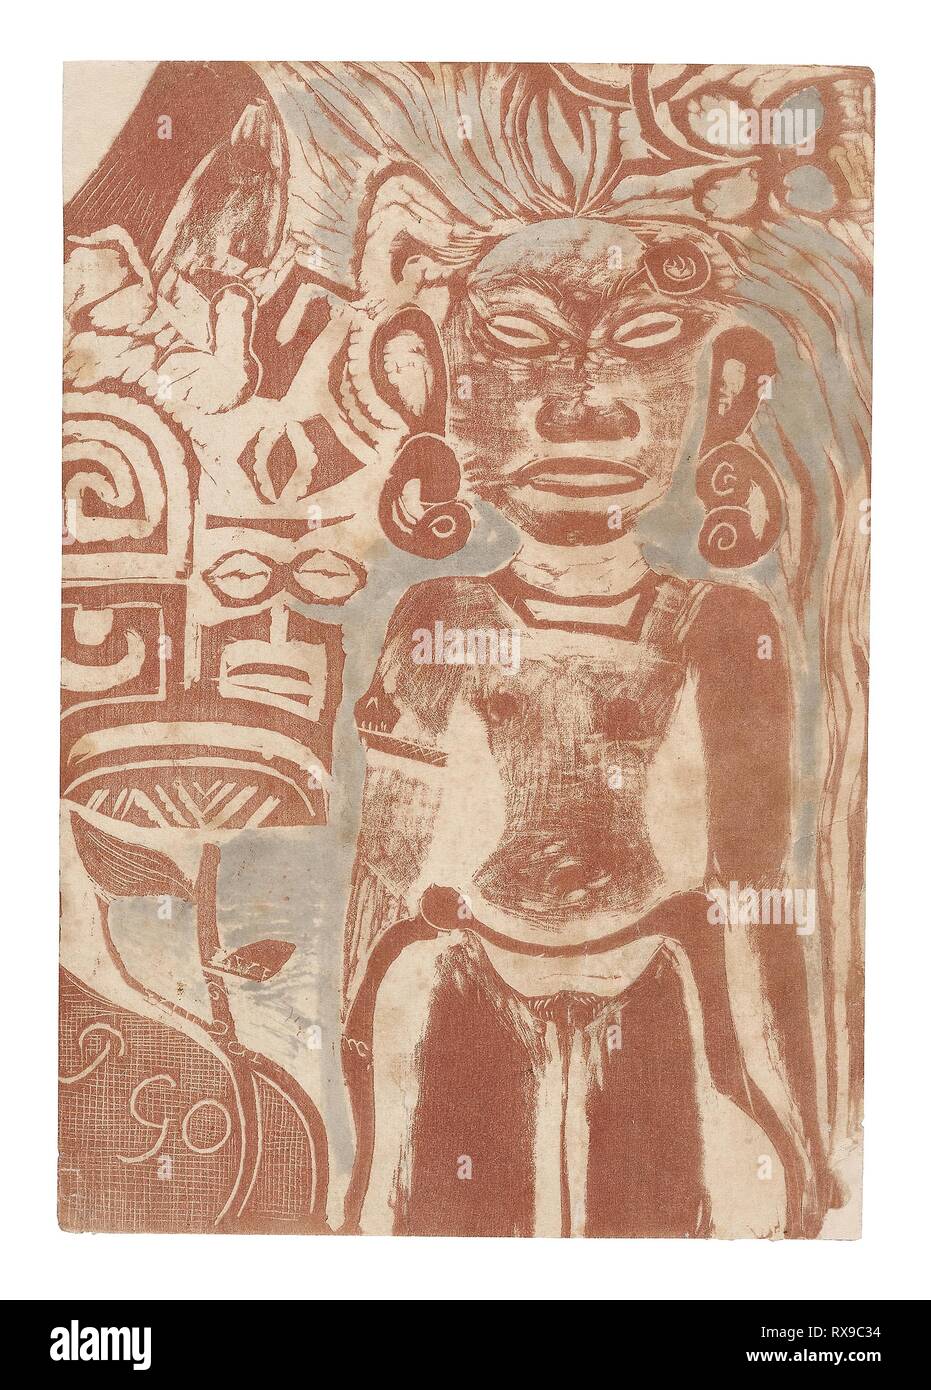 Tahitian Idol--the Goddess Hina. Paul Gauguin; French, 1848-1903. Date: 1894-1895. Dimensions: 142 × 99 mm (image/primary/secondary support). Wood-block print in reddish-brown ink with blue-gray watercolor on ivory wove paper, laid down on ivory wove paper. Origin: France. Museum: The Chicago Art Institute. Stock Photo